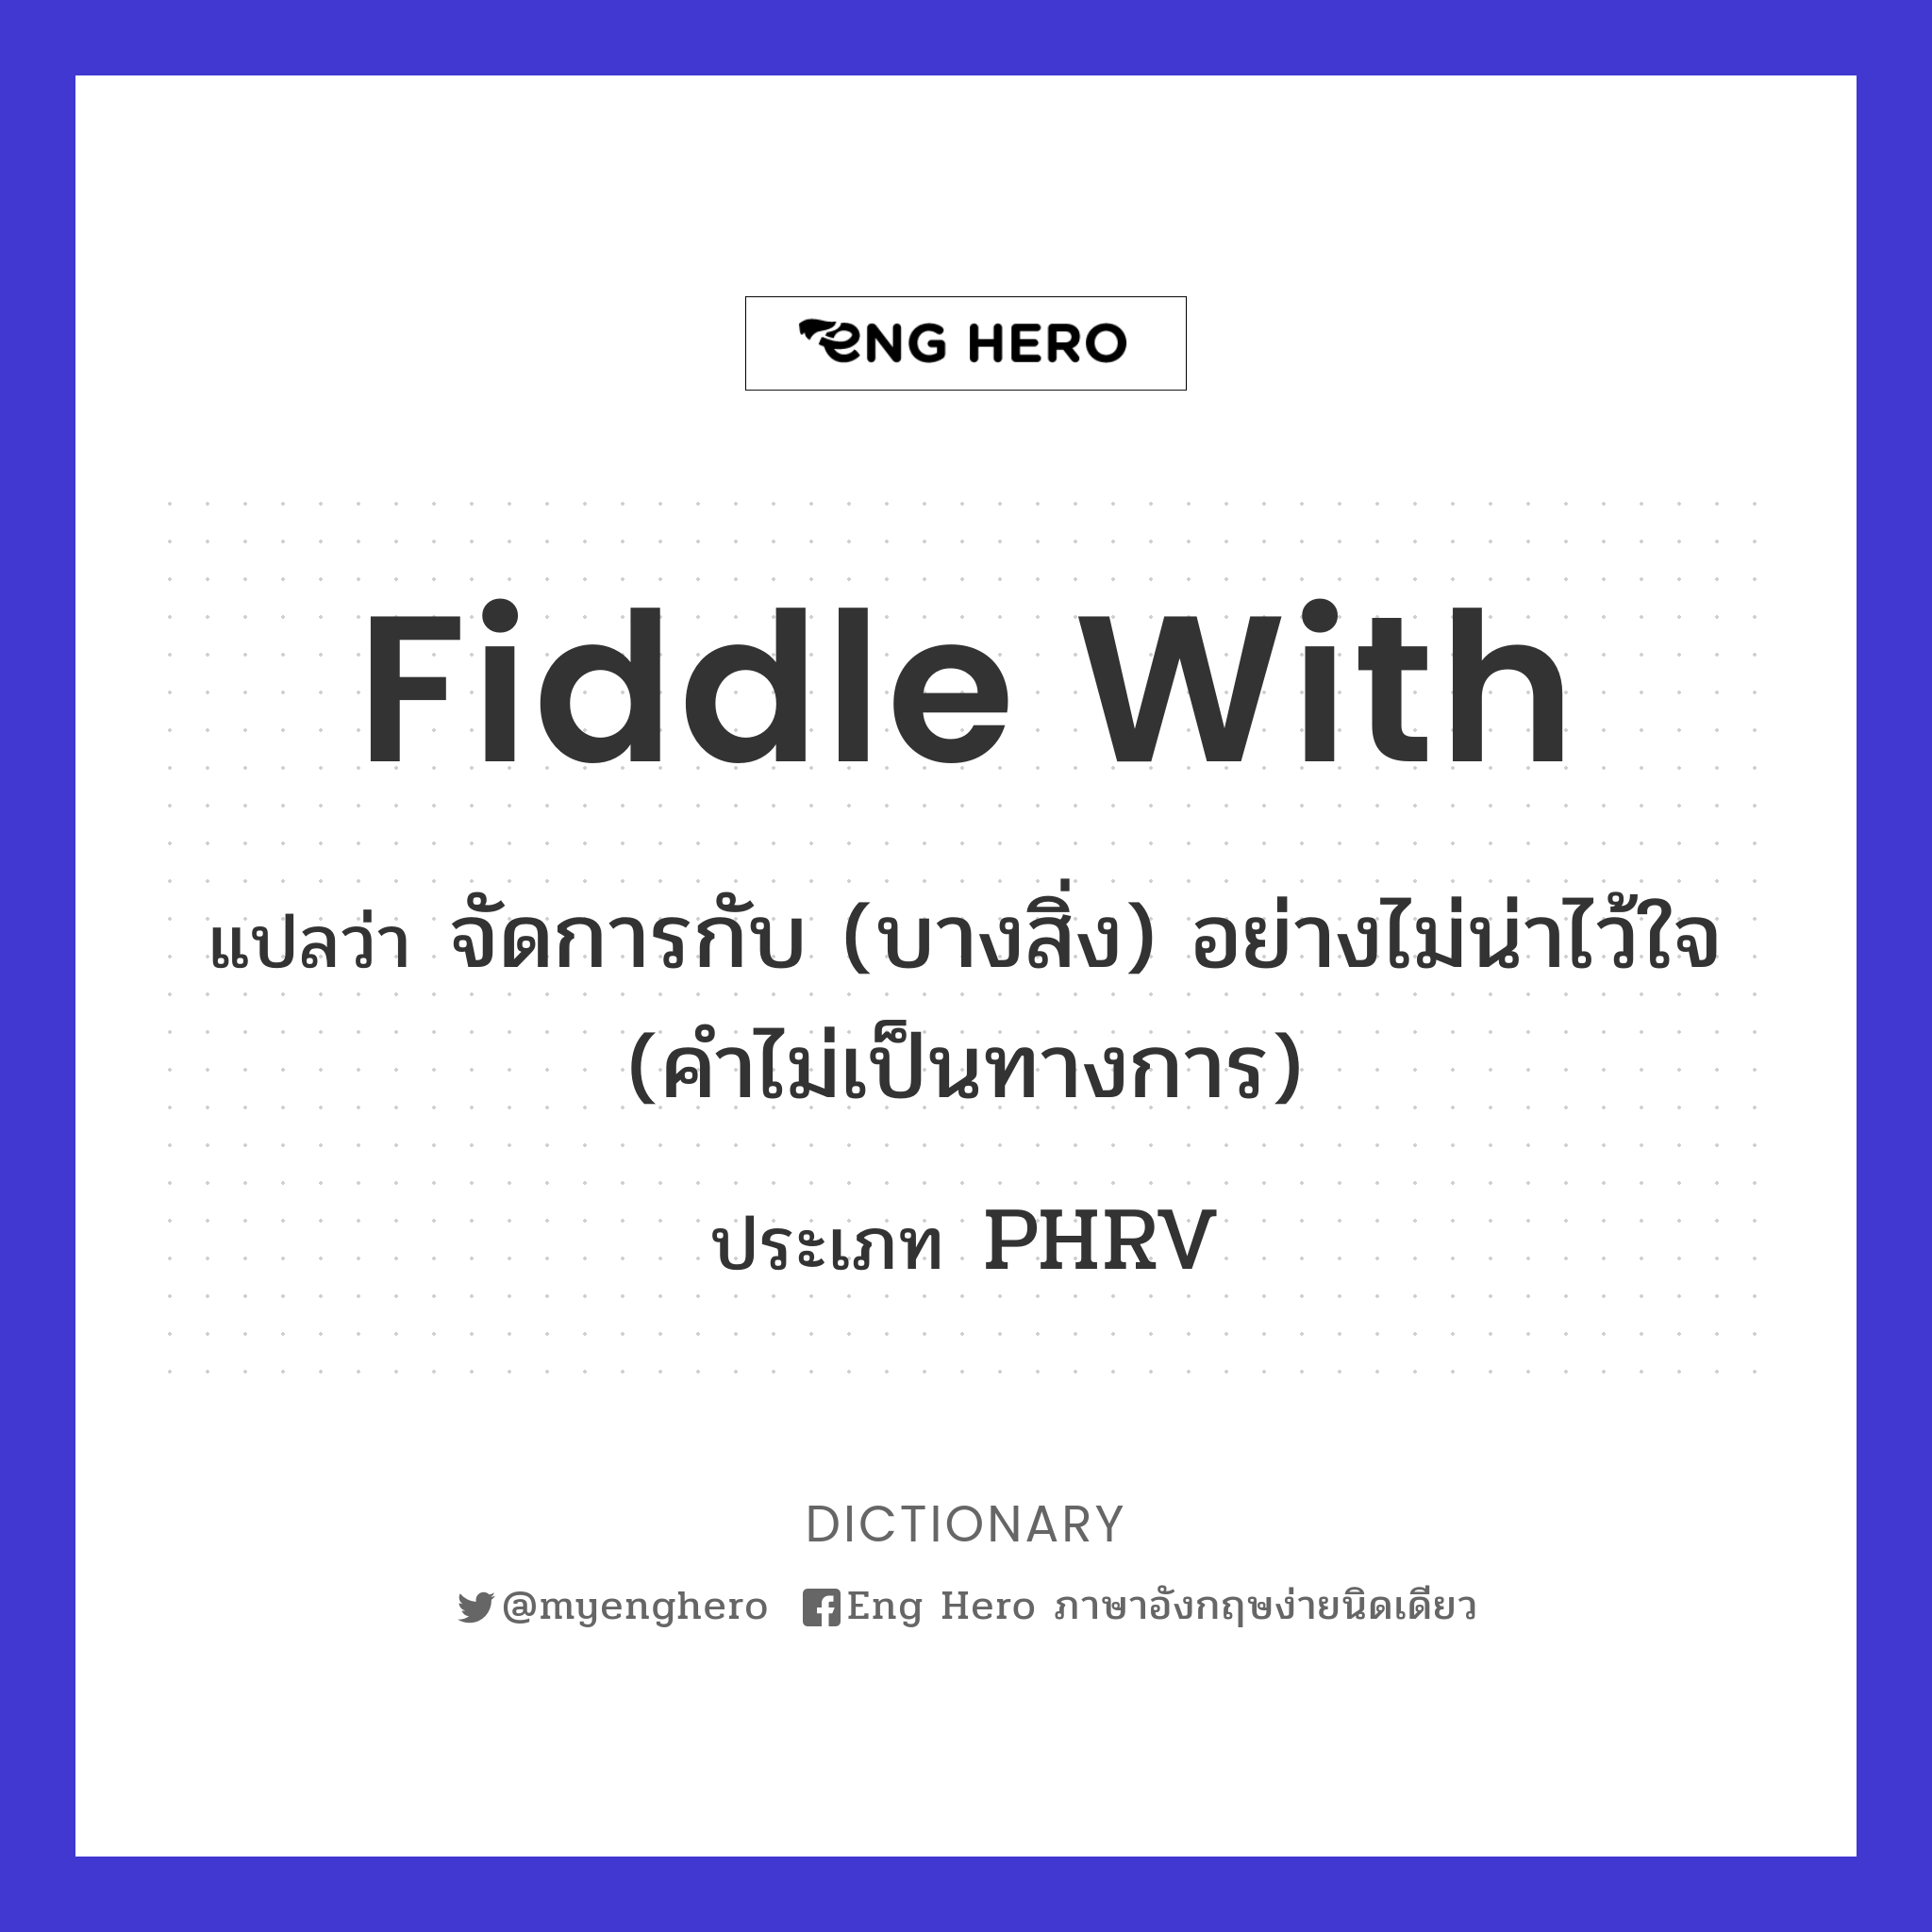 fiddle with